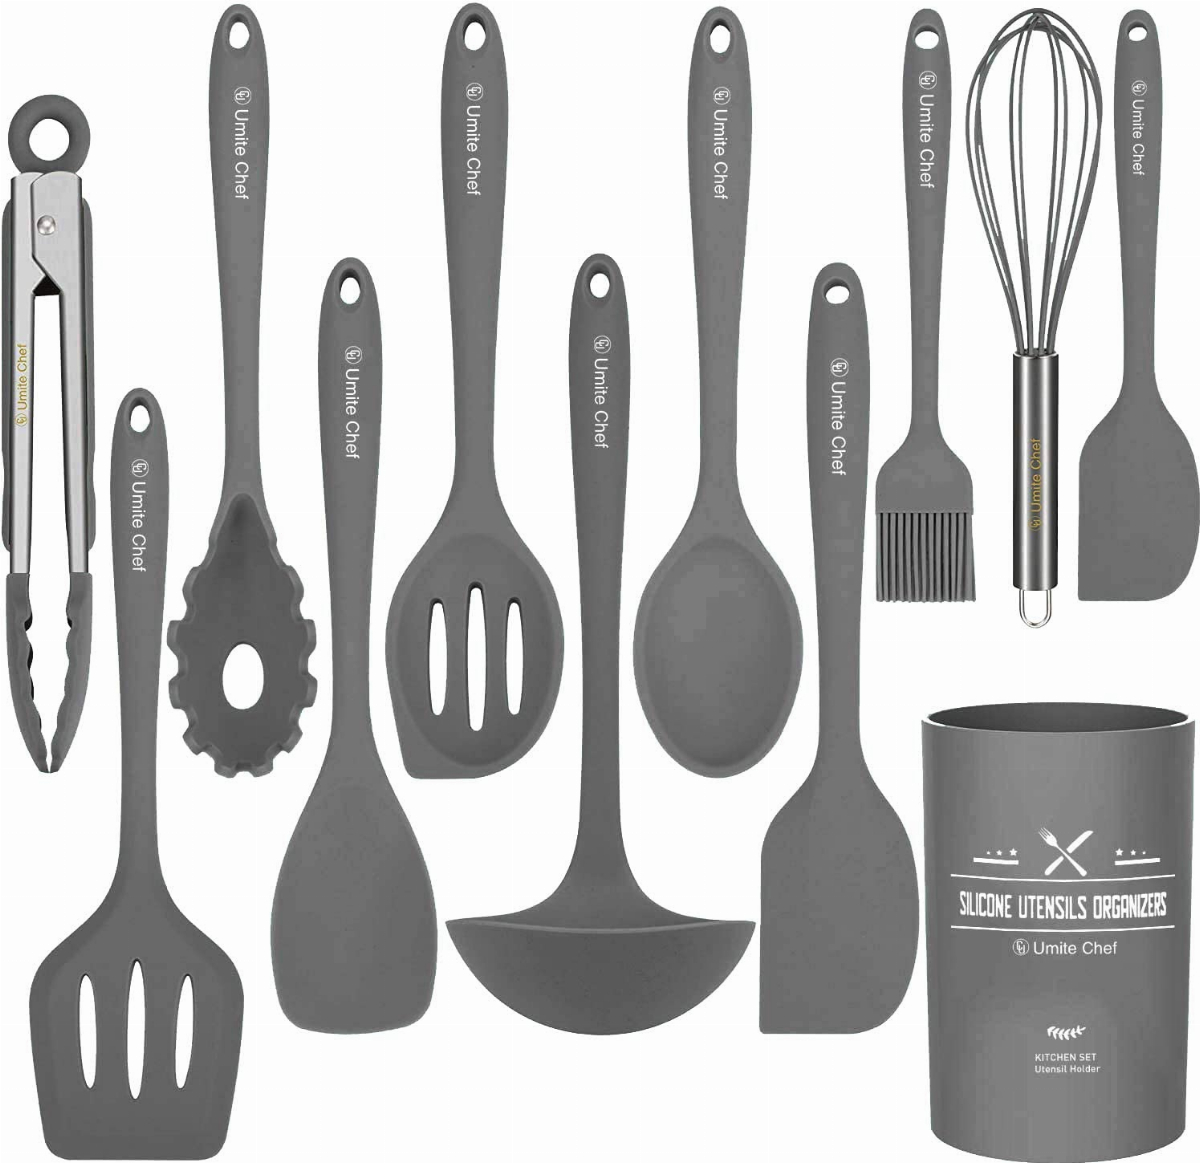 12pcs Set Silicone Cooking Utensil Set Umite Chef Silicone Cooking Kitchen  Utensils Set Kitchen Cookware With Holder For Nonstick Cookware Bpa Free, 24/7 Customer Service